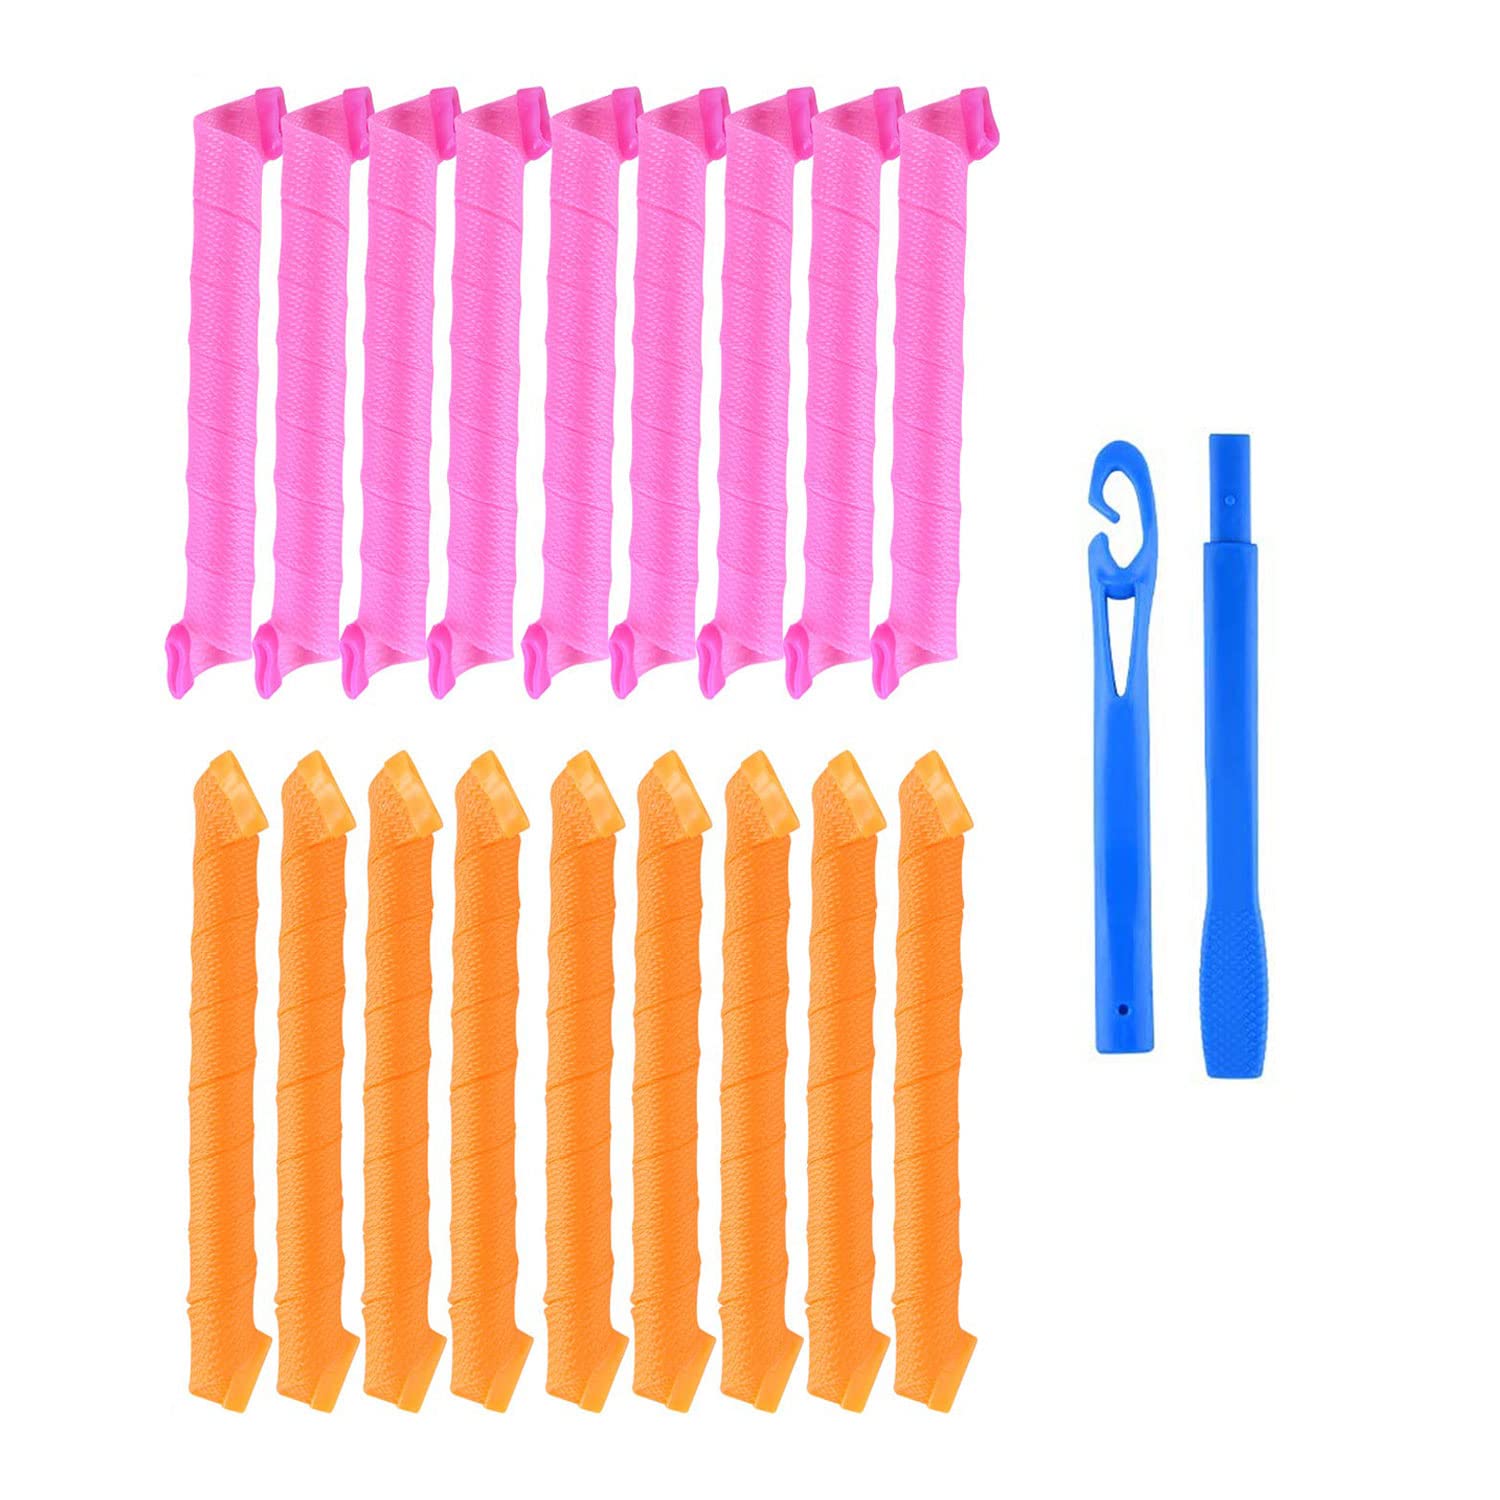 CAM2 Hair Rollers, 18 Pieces Curlers Overnight Rollers Hair Curler Women\'s Curls without Heat Curler Set 30 cm with 1 Styling Hook, orange ‎pink,